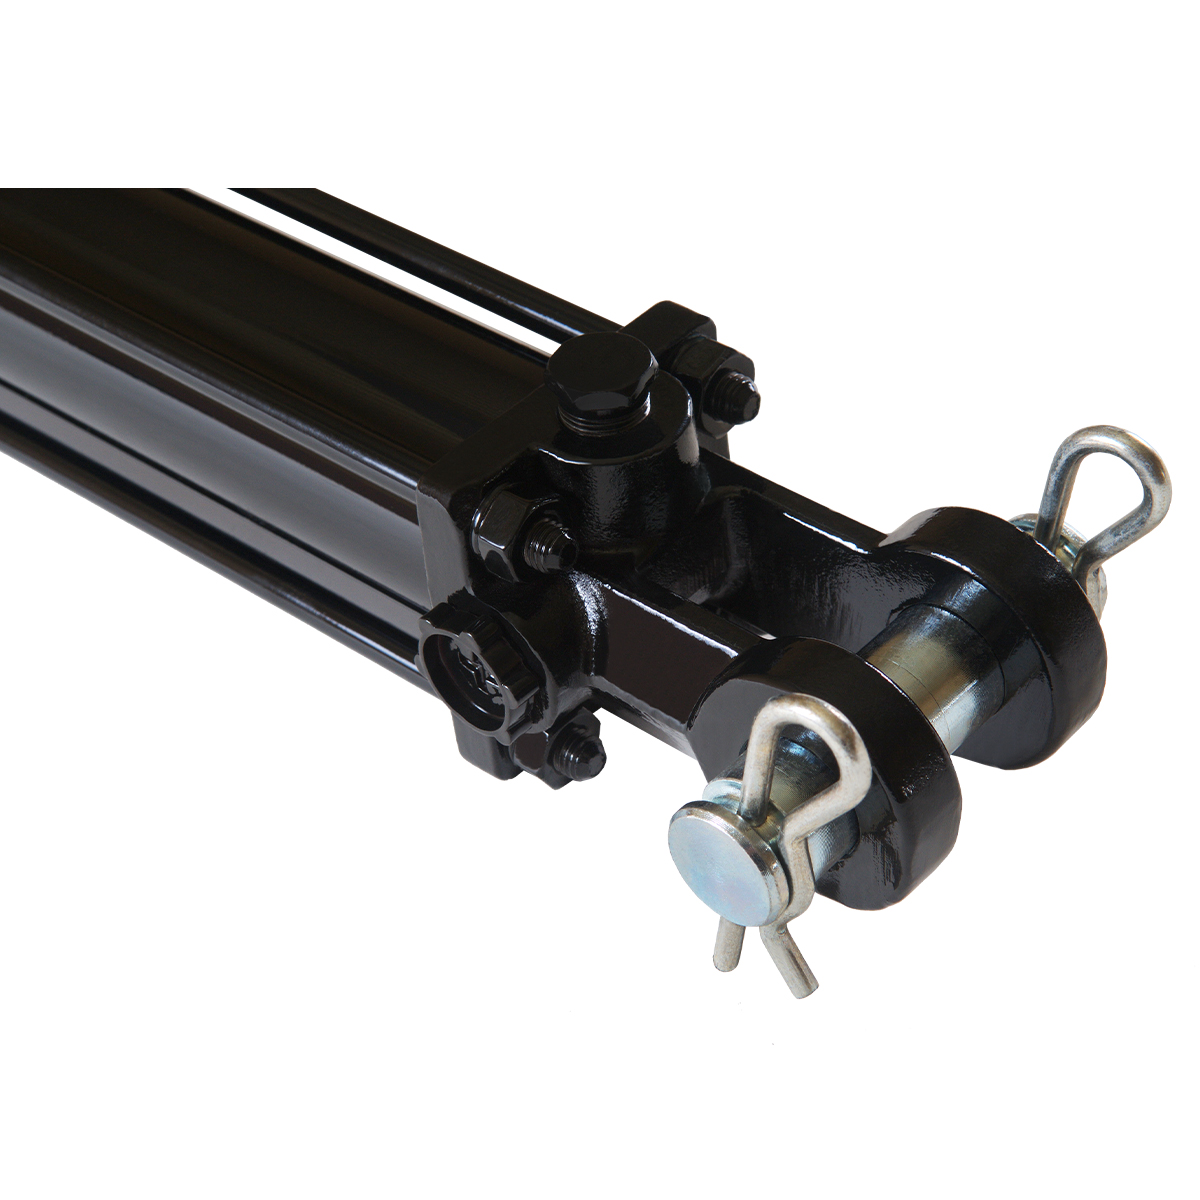 2 bore x 8 ASAE stroke hydraulic cylinder, tie rod double acting cylinder | Magister Hydraulics